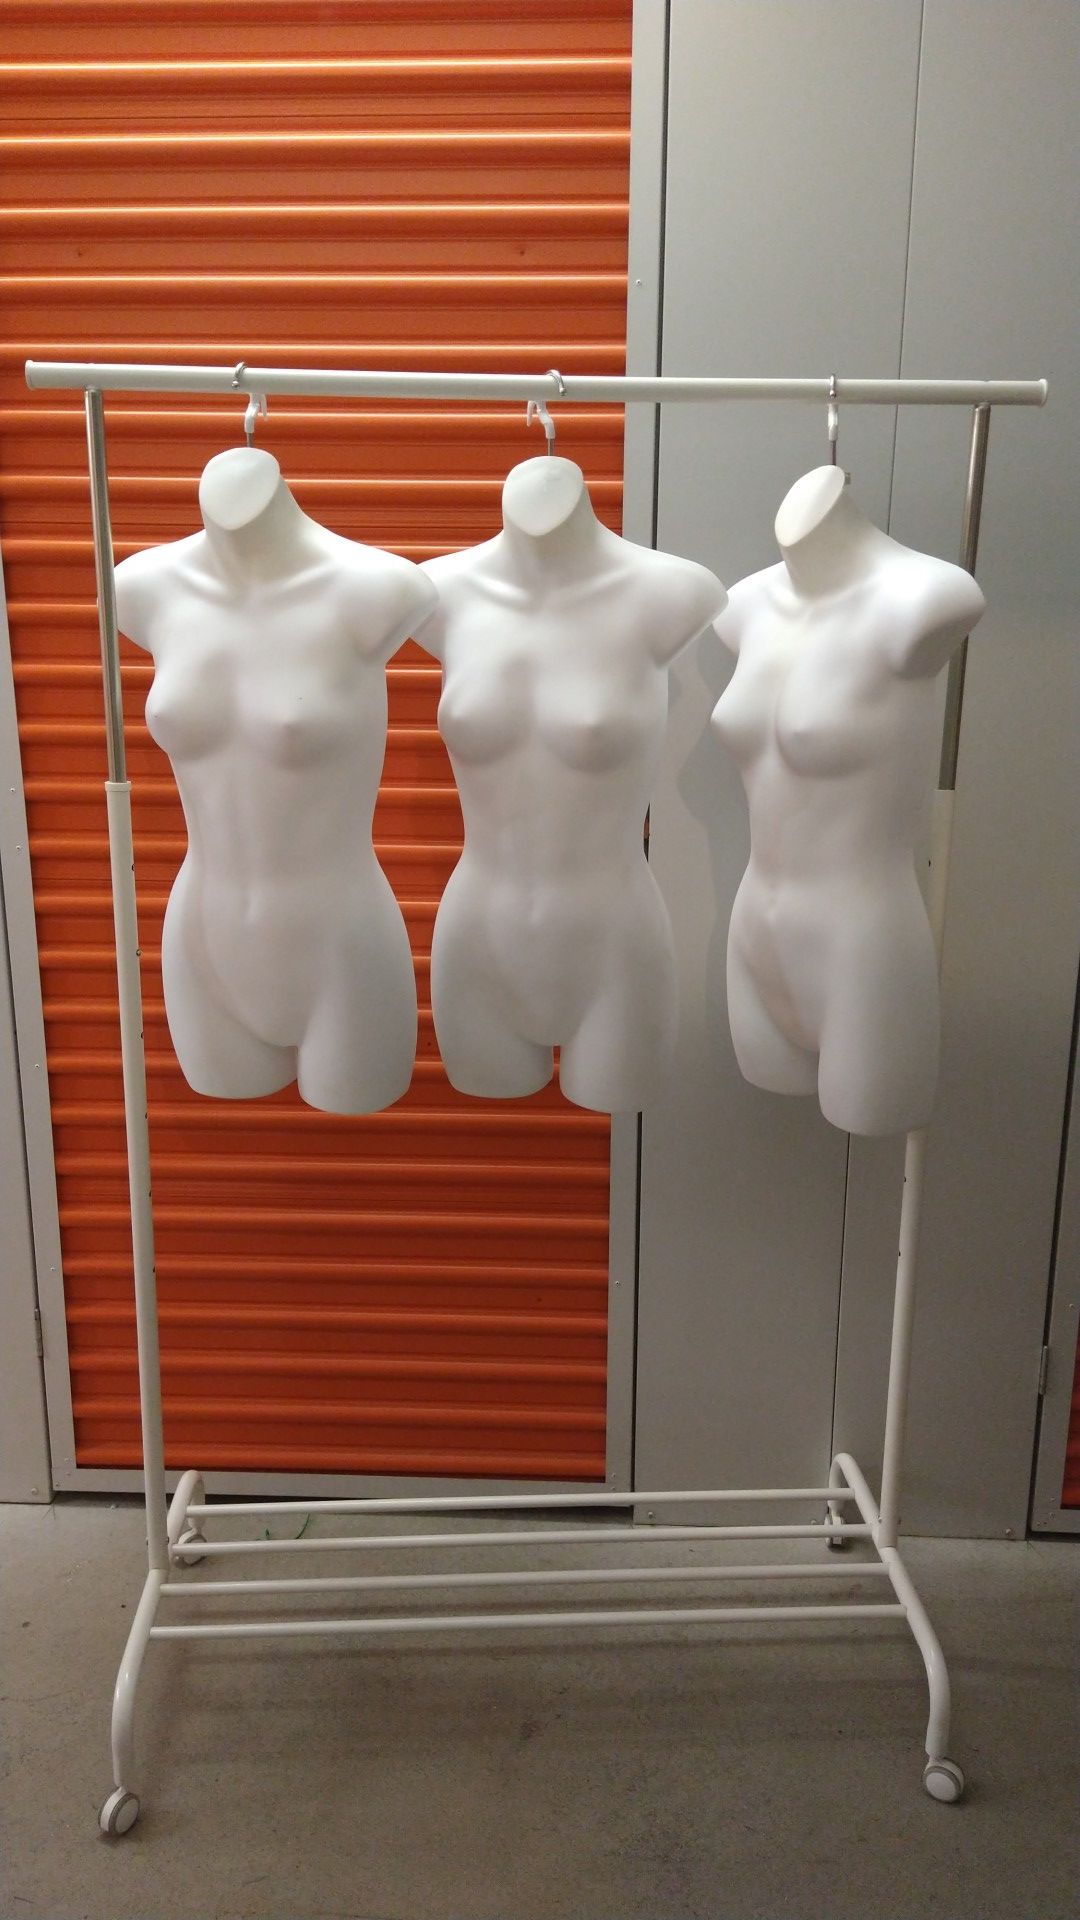 Adjustable clothing rack and hanging mannequin displays